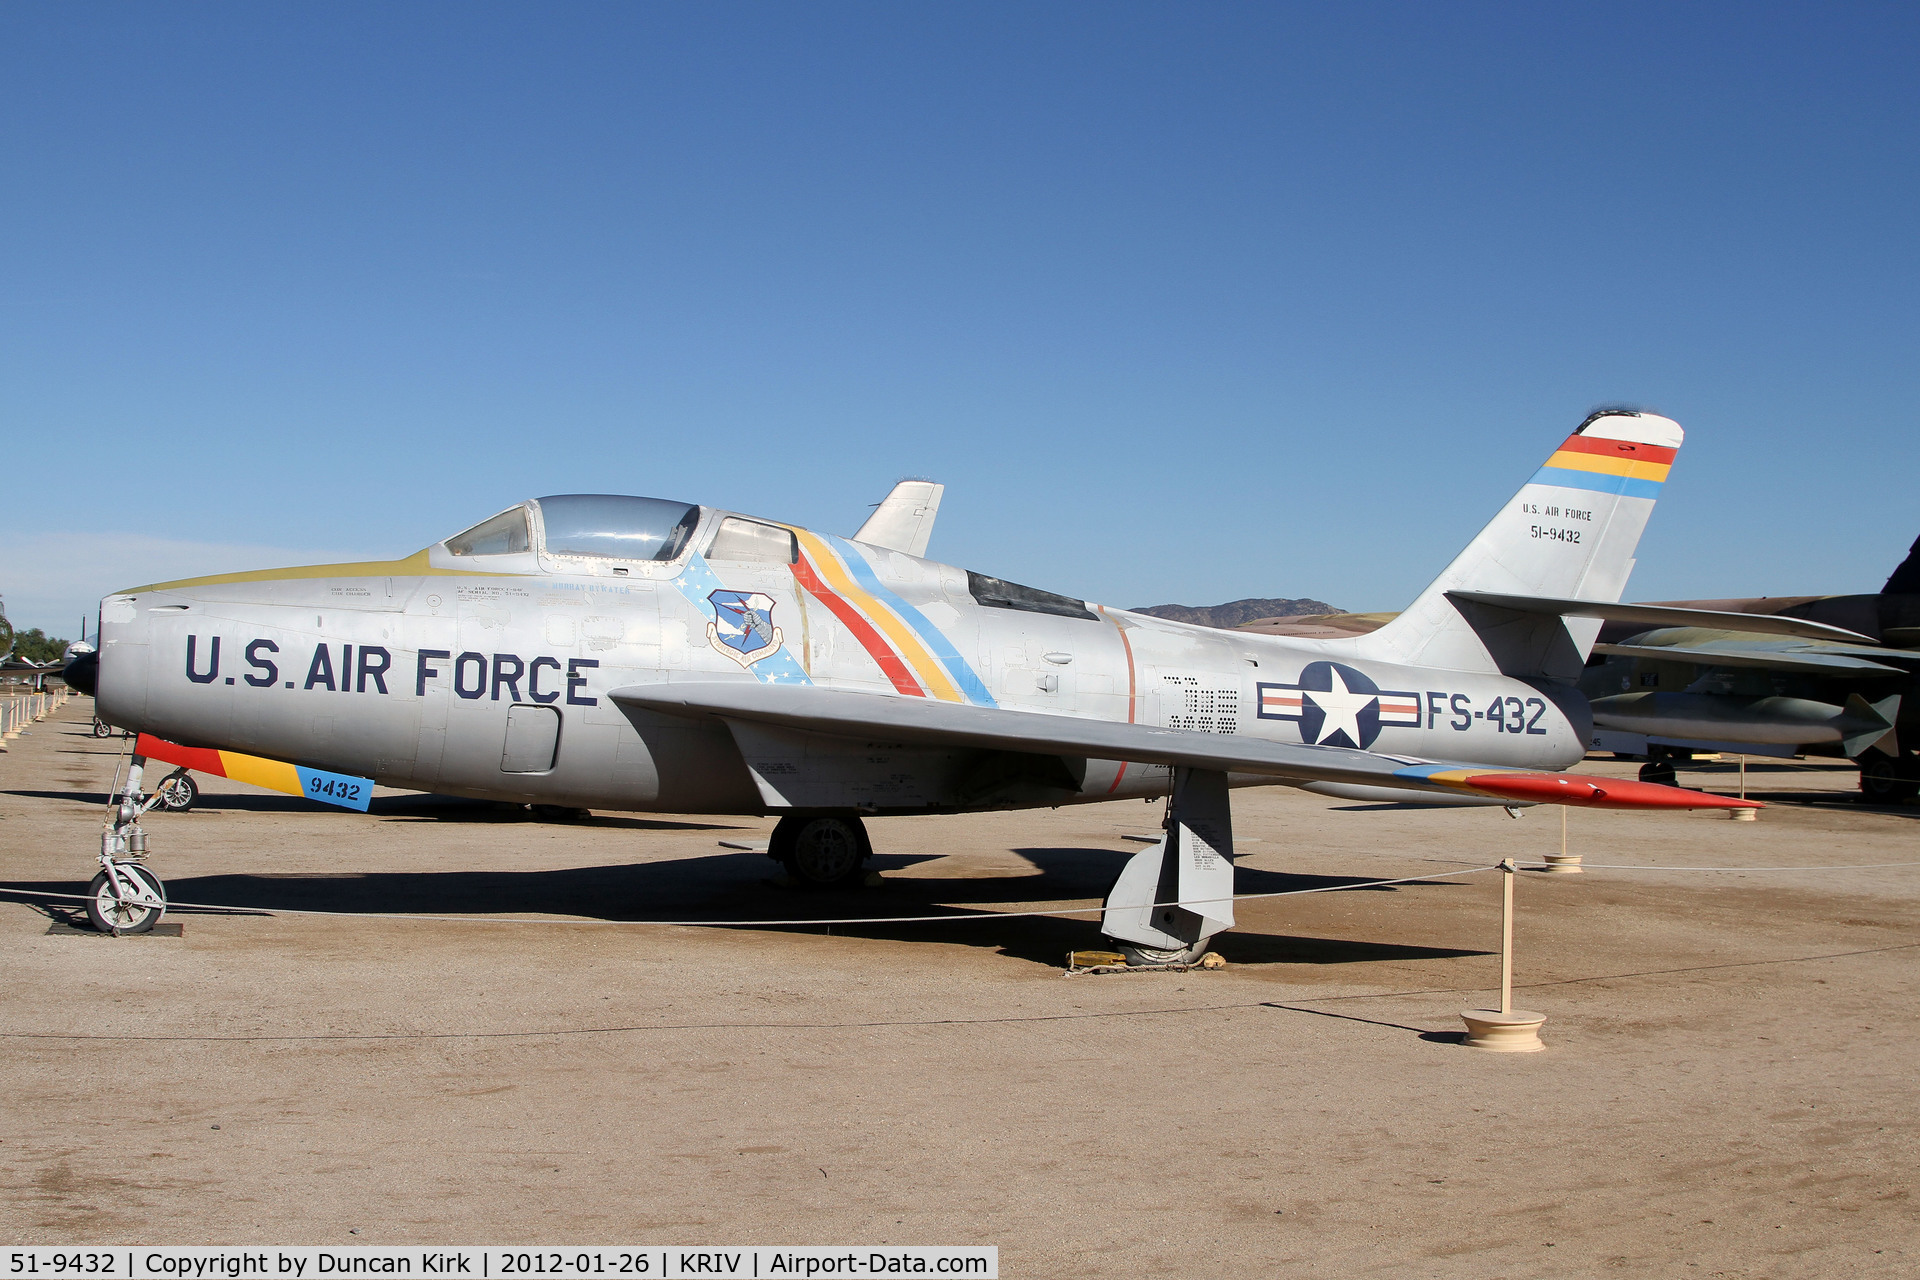 51-9432, 1951 General Motors F-84F Thunderstreak C/N Not found 51-9432, What a gem. Would love to hear this fire up!